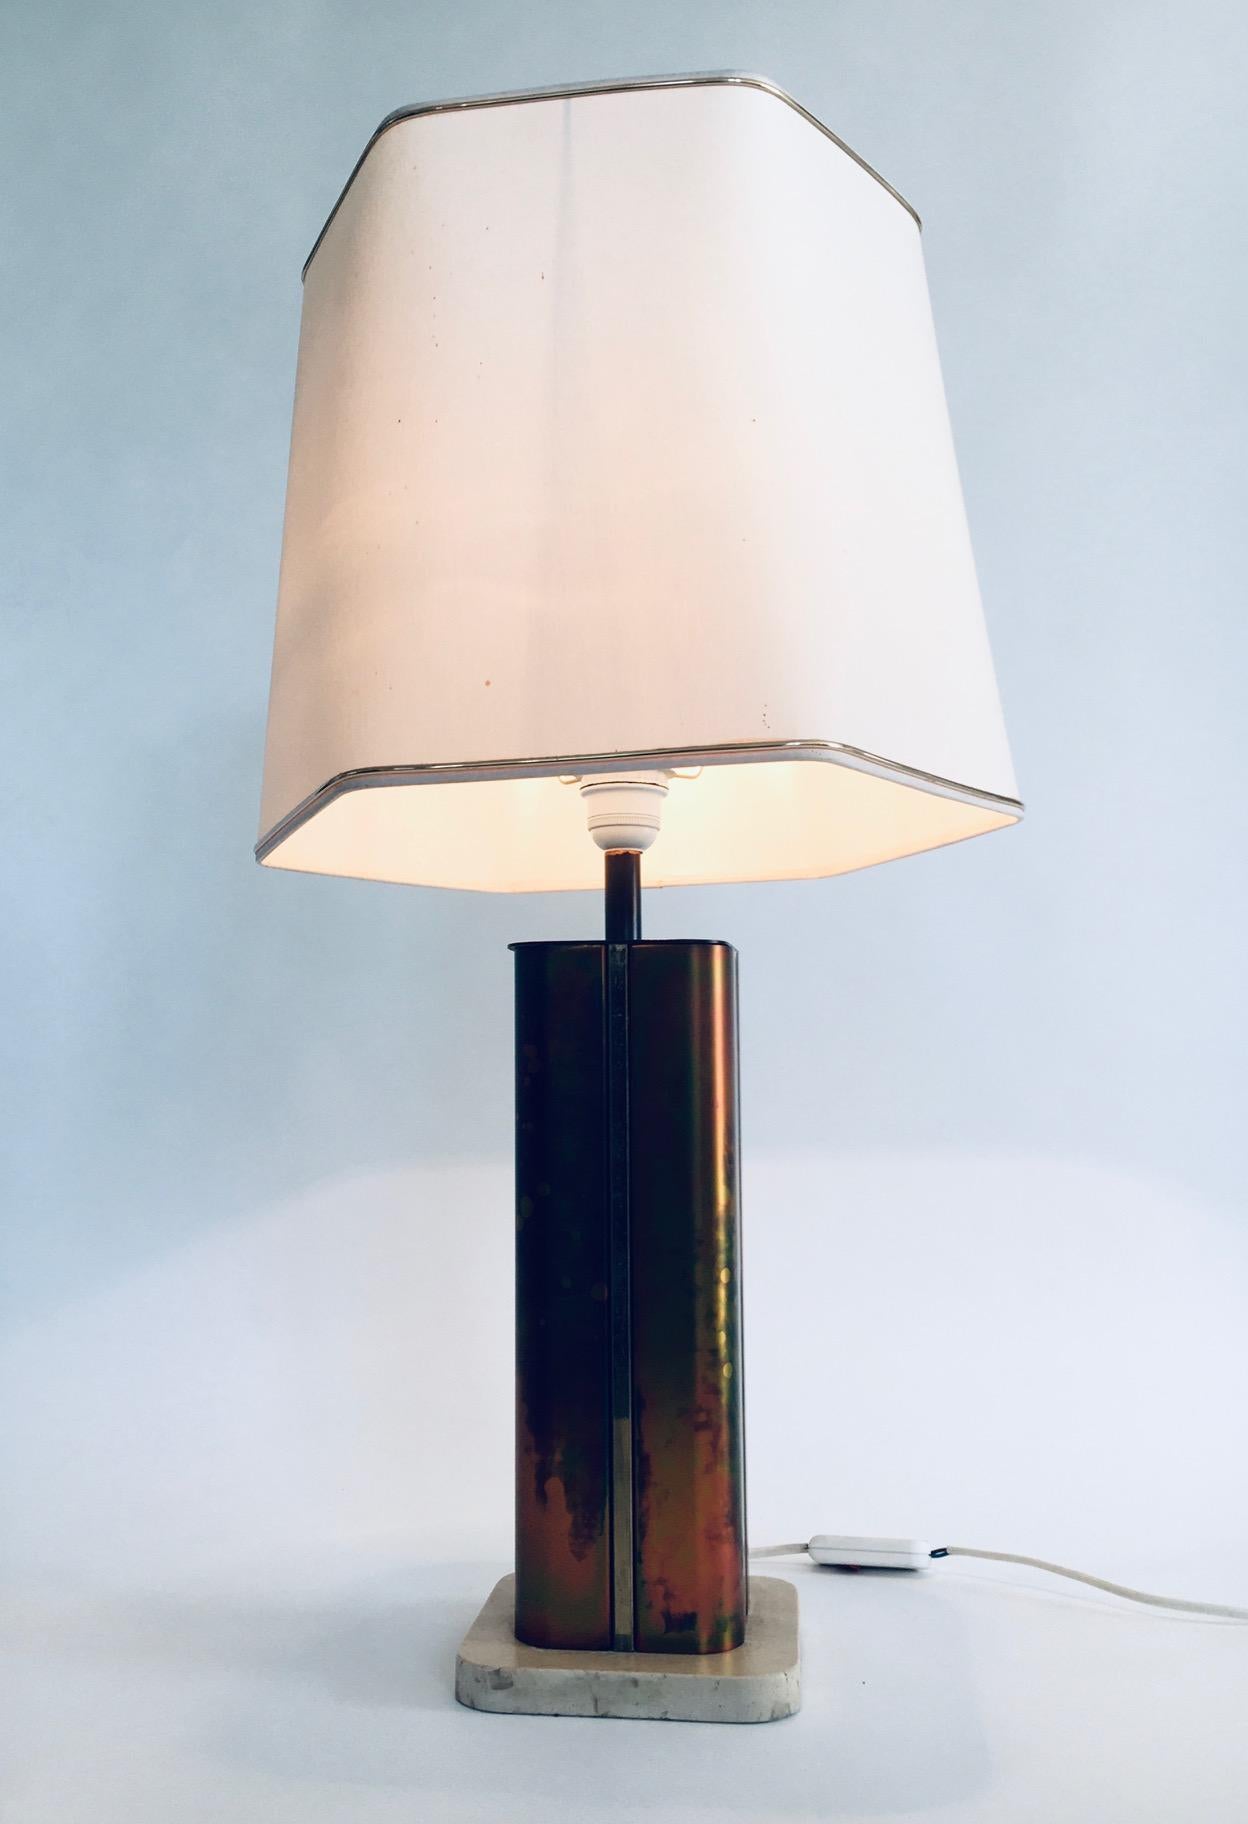 Hollywood Regency Style Design Table Lamp by Fedam, Holland, 1970's For Sale 1